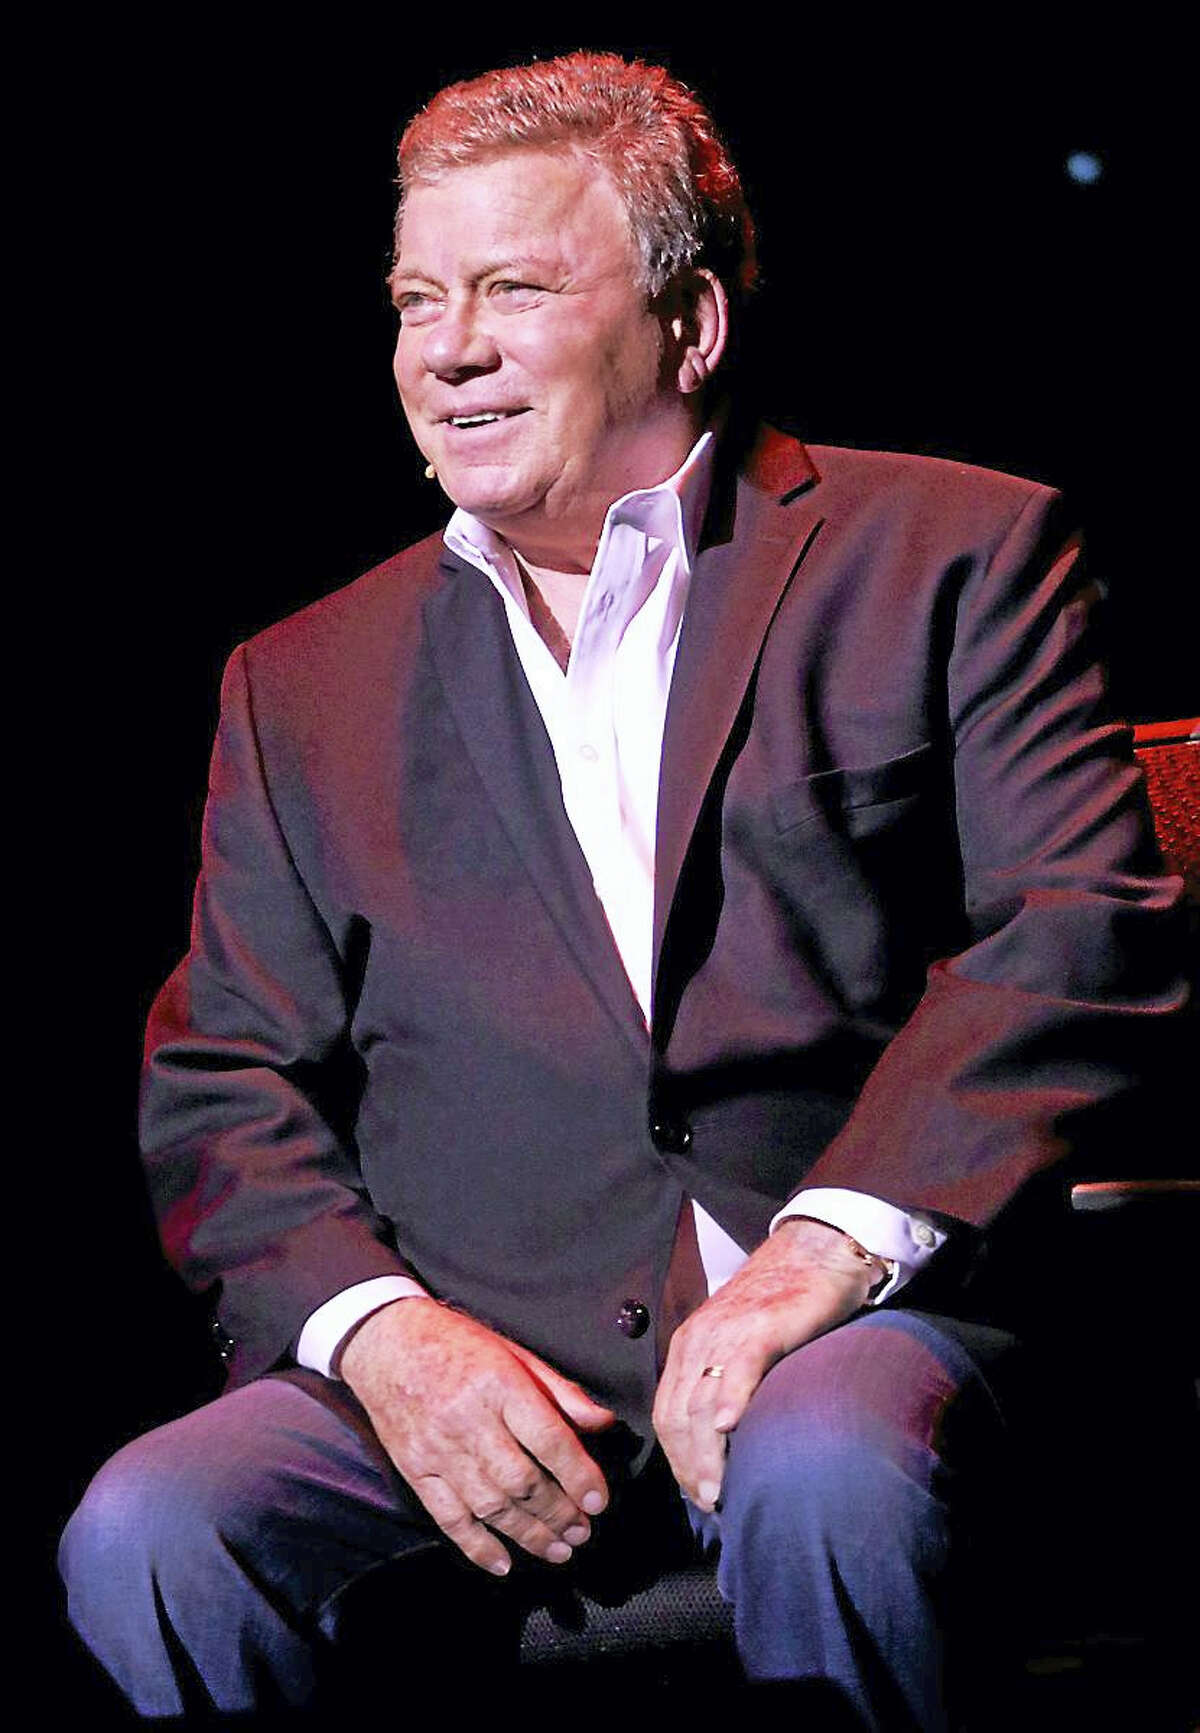 Photo by John AtashianActor, singer, author, producer, spokesman and comedian William Shatner is shown performing on stage during his concert appearance at the Foxwoods Resort Casino in Mashantucket on Saturday, Feb. 6. Shatner entertained the capacity crowd of fans with conversation and stories about his career and life. To view the complete line up of upcoming entertainment coming to Foxwood, visit www.foxwoods.com